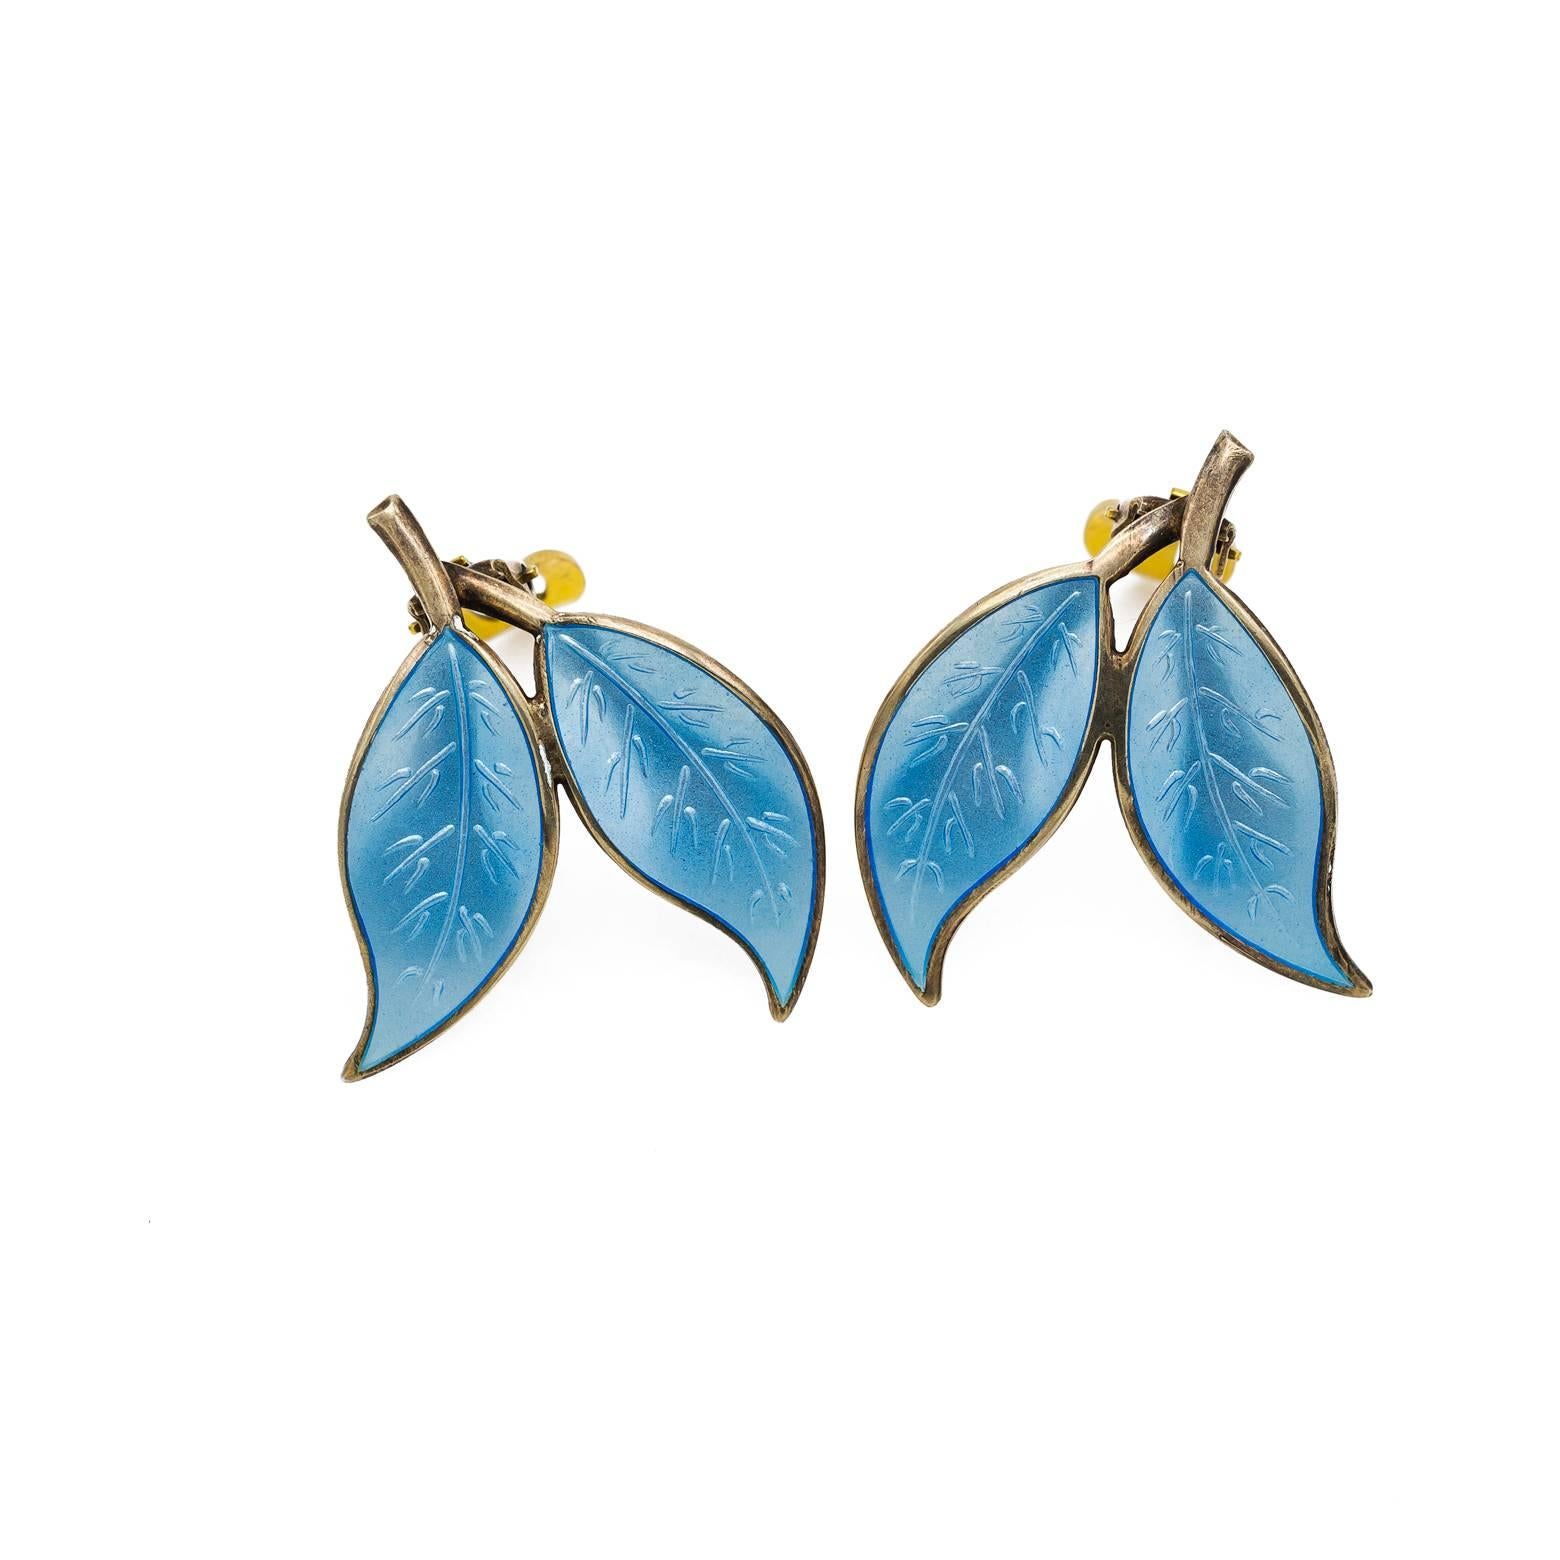 These stunning sky blue Guilloche earrings glow with a shine and texture made for paradise. Silky smooth, the two leaf design pops and the artistic detail creates a masterpiece. Inquire about the entire set.